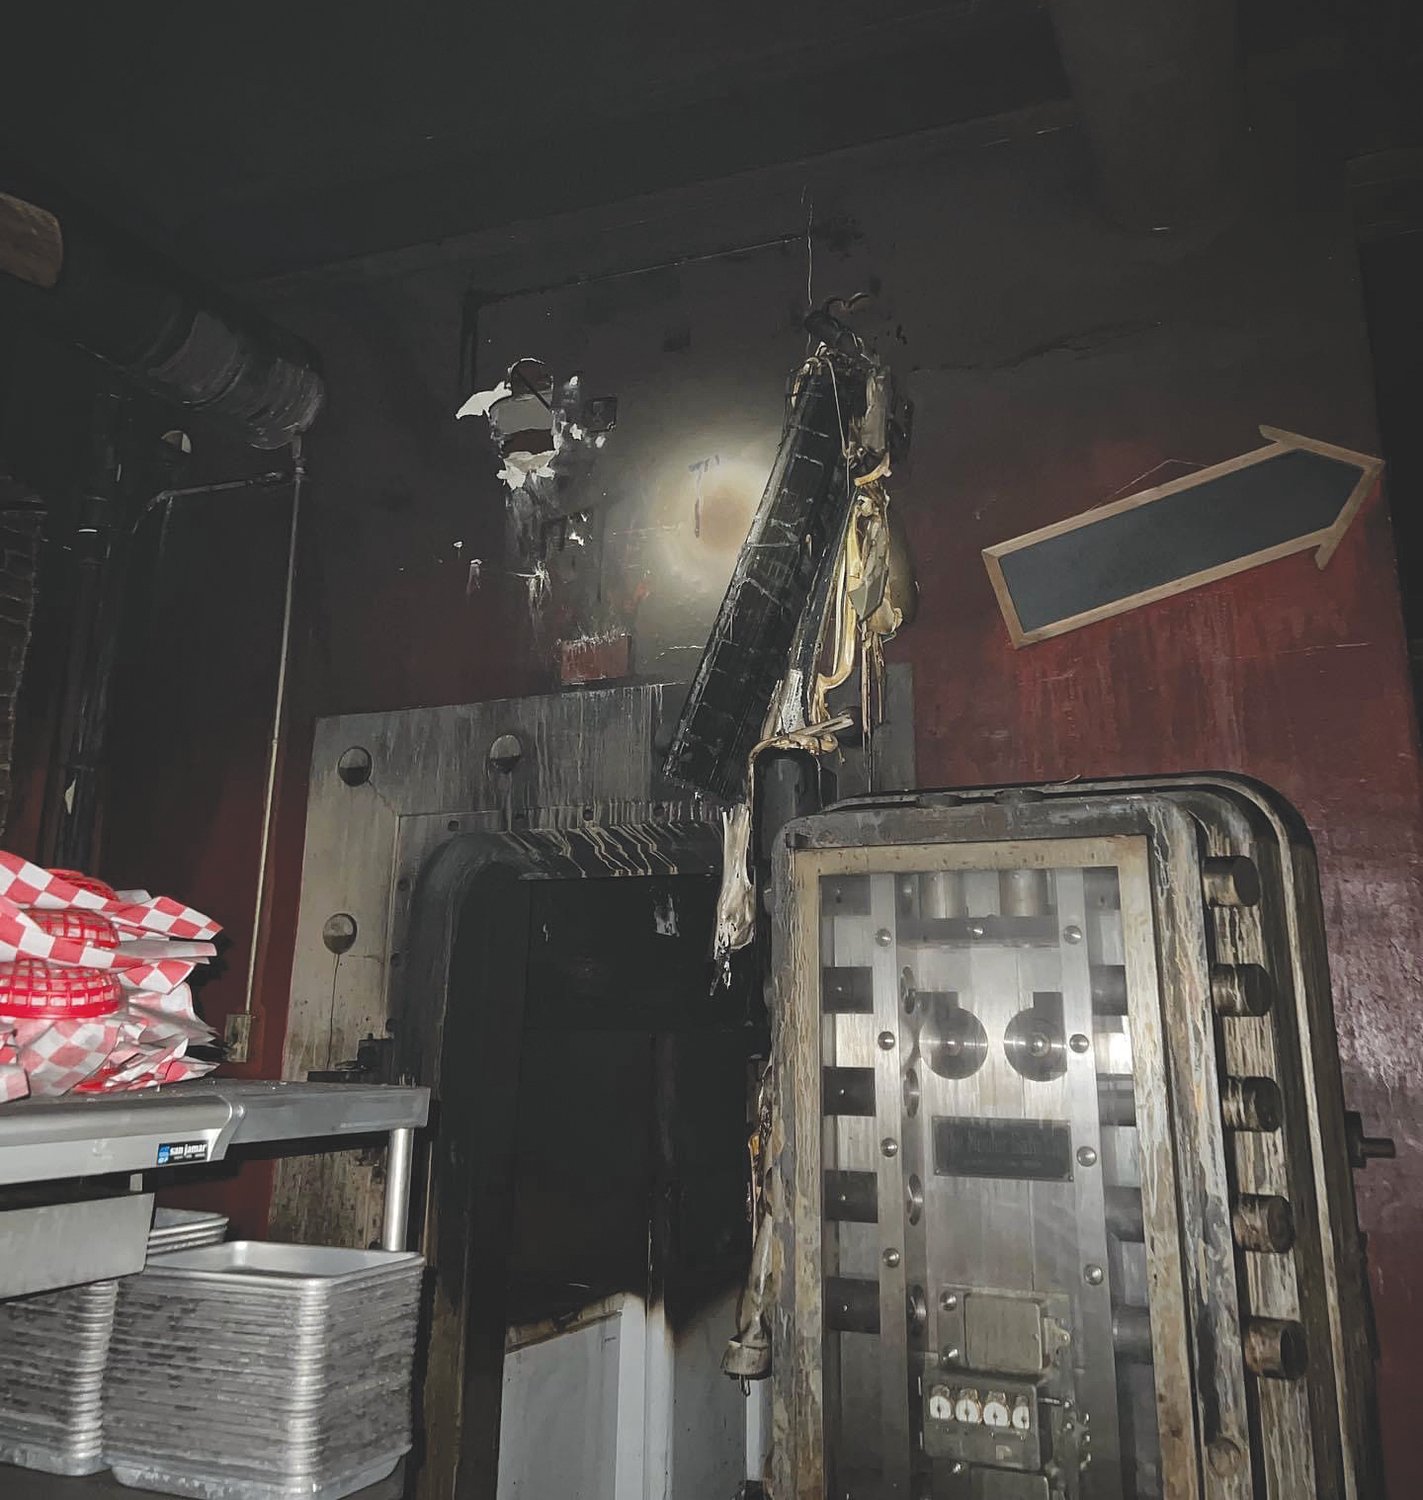 The fire was contained to the vault area.